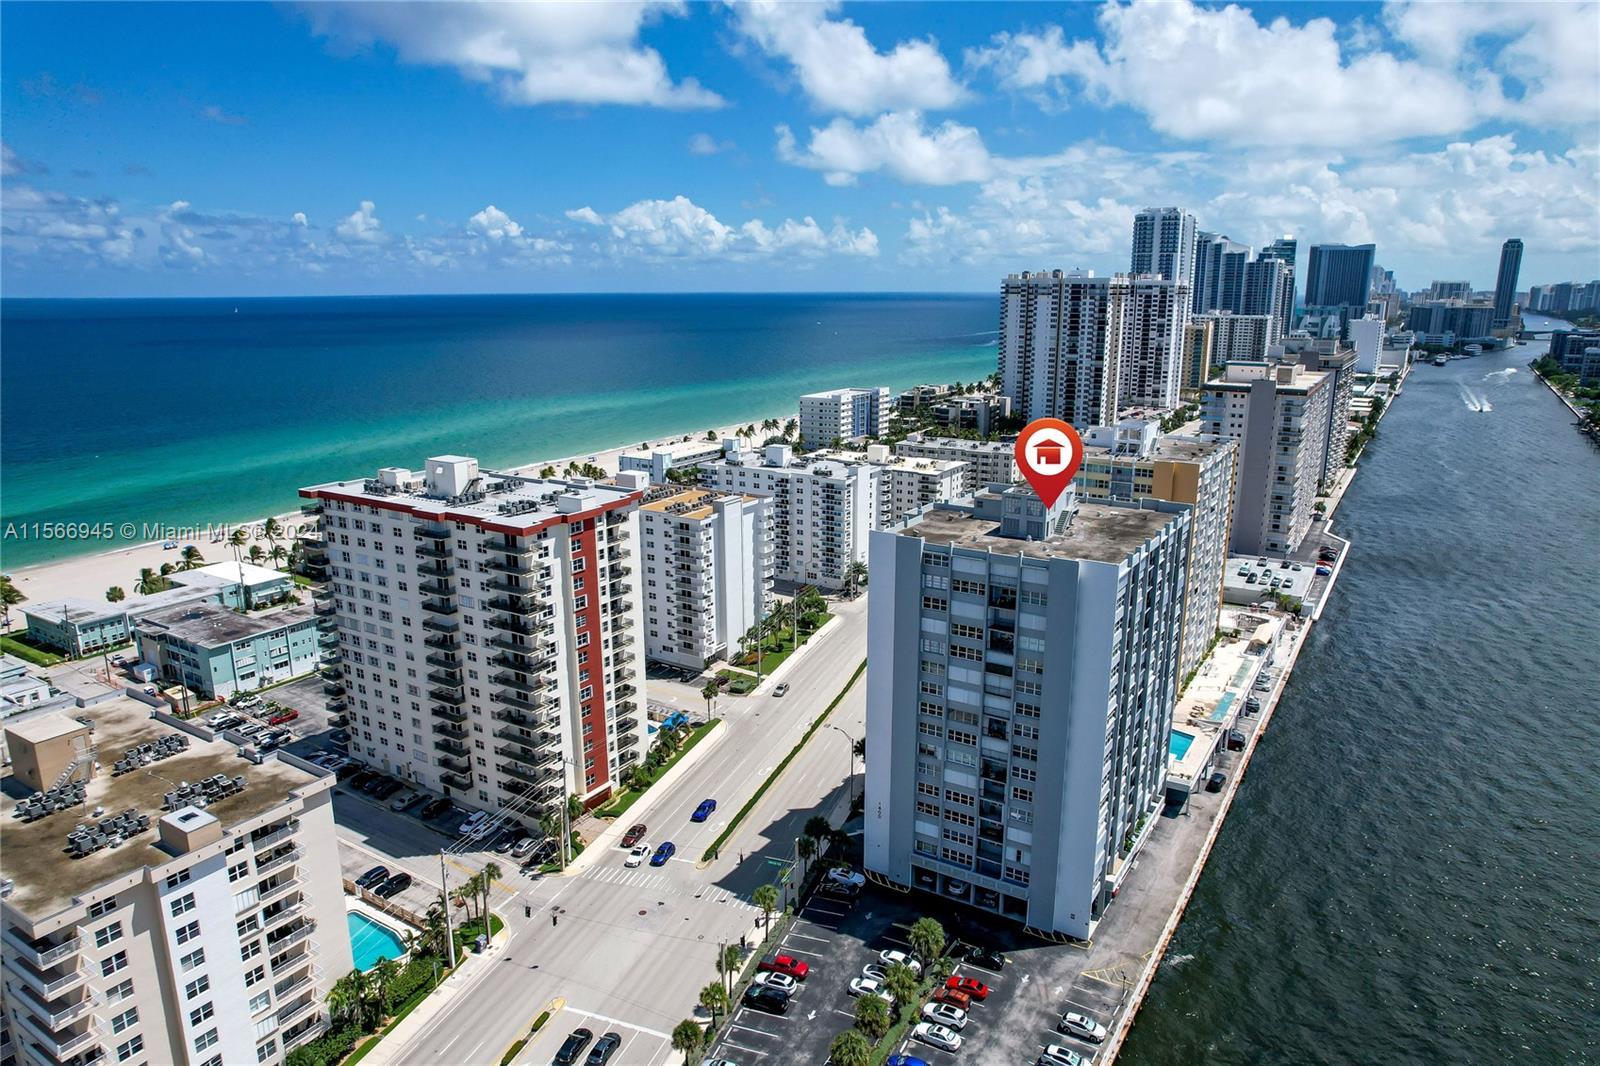 Photo of 1400 S Ocean Dr #1605 in Hollywood, FL